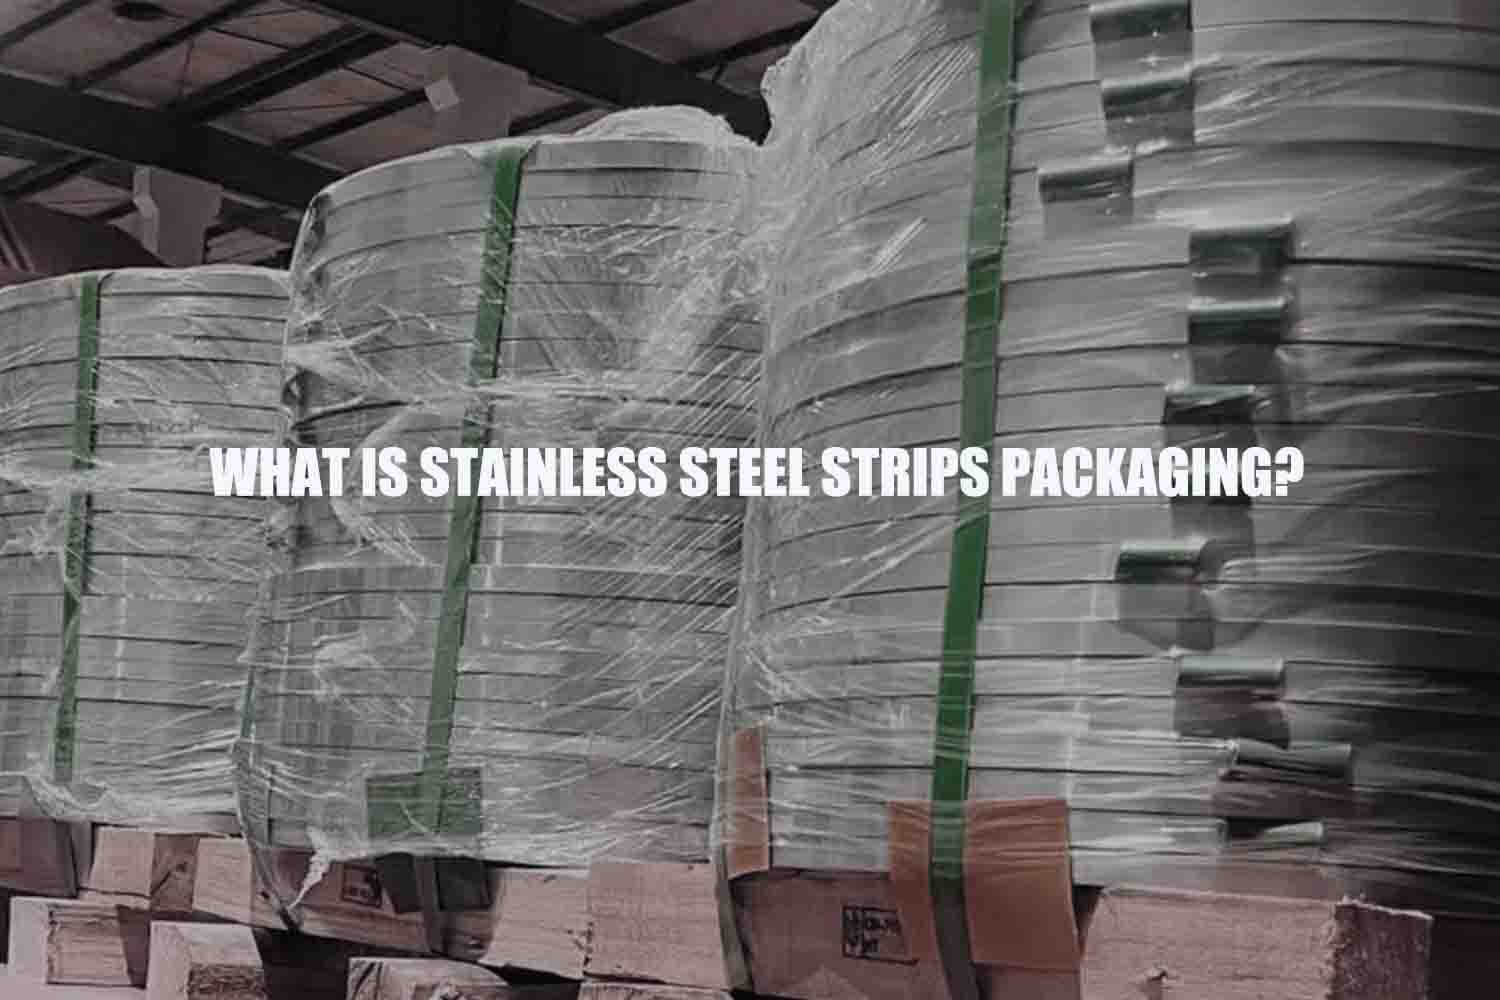 6 stainless steel strips packaging questions